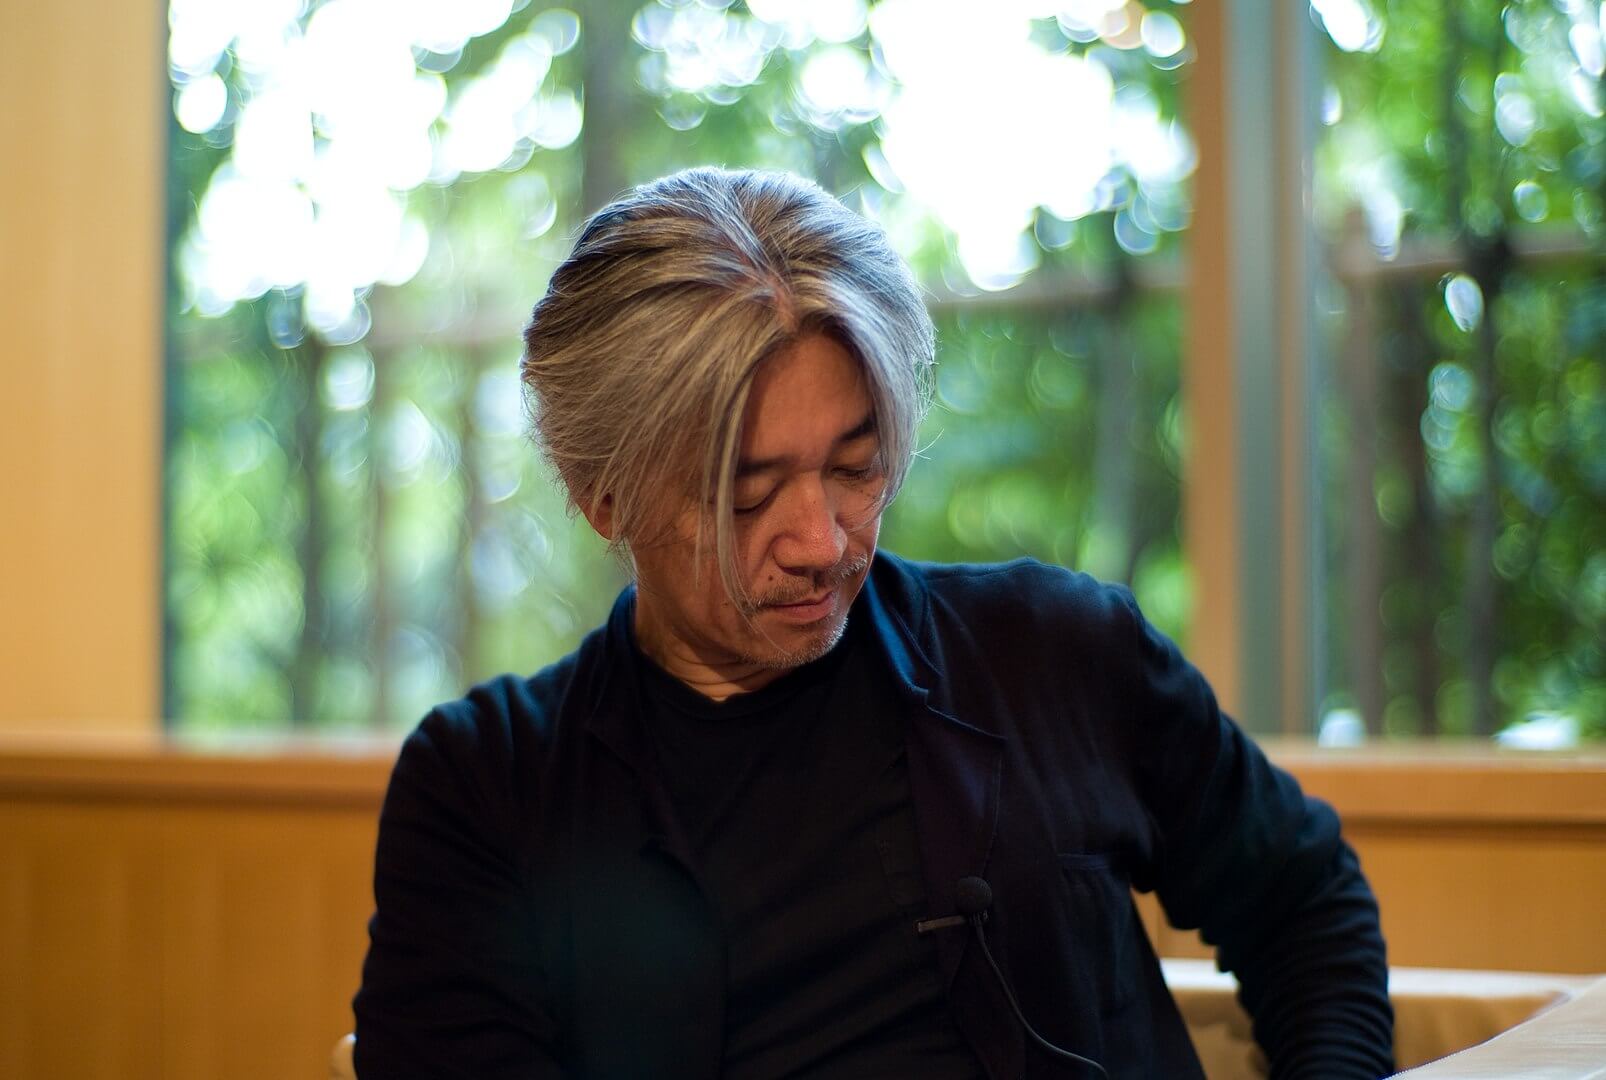 By Joi Ito from Inbamura, Japan - Ryuichi Sakamoto, CC BY 2.0, https://commons.wikimedia.org/w/index.php?curid=2935122